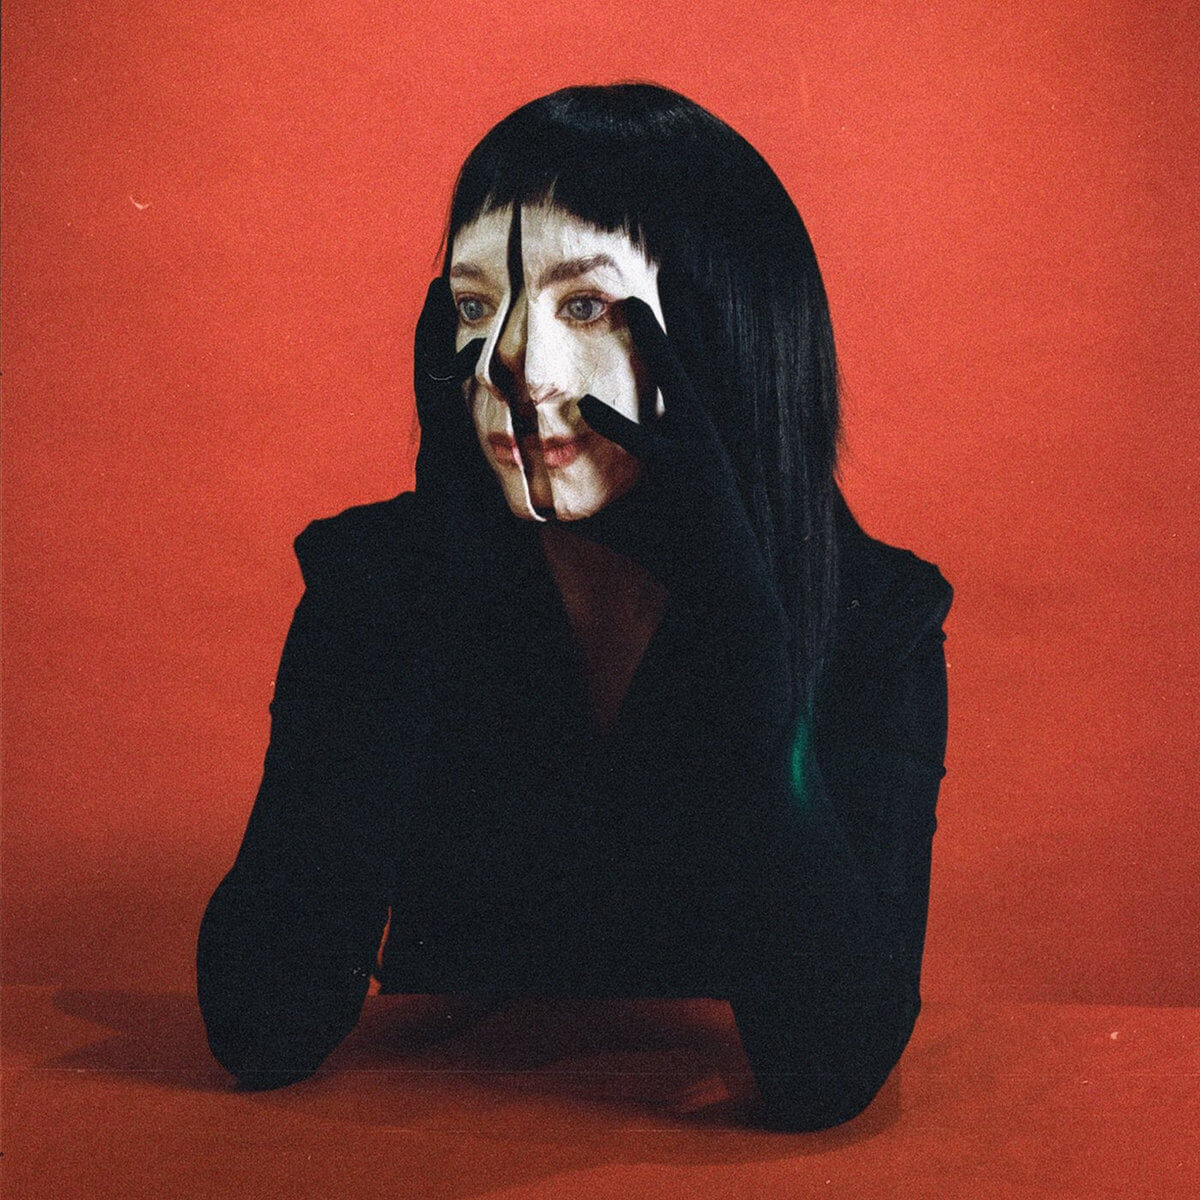 Girl With No Face by Allie X album review by David Saxum for Northern Transmissions. The singer/songwriter's LP drops on February 23rd